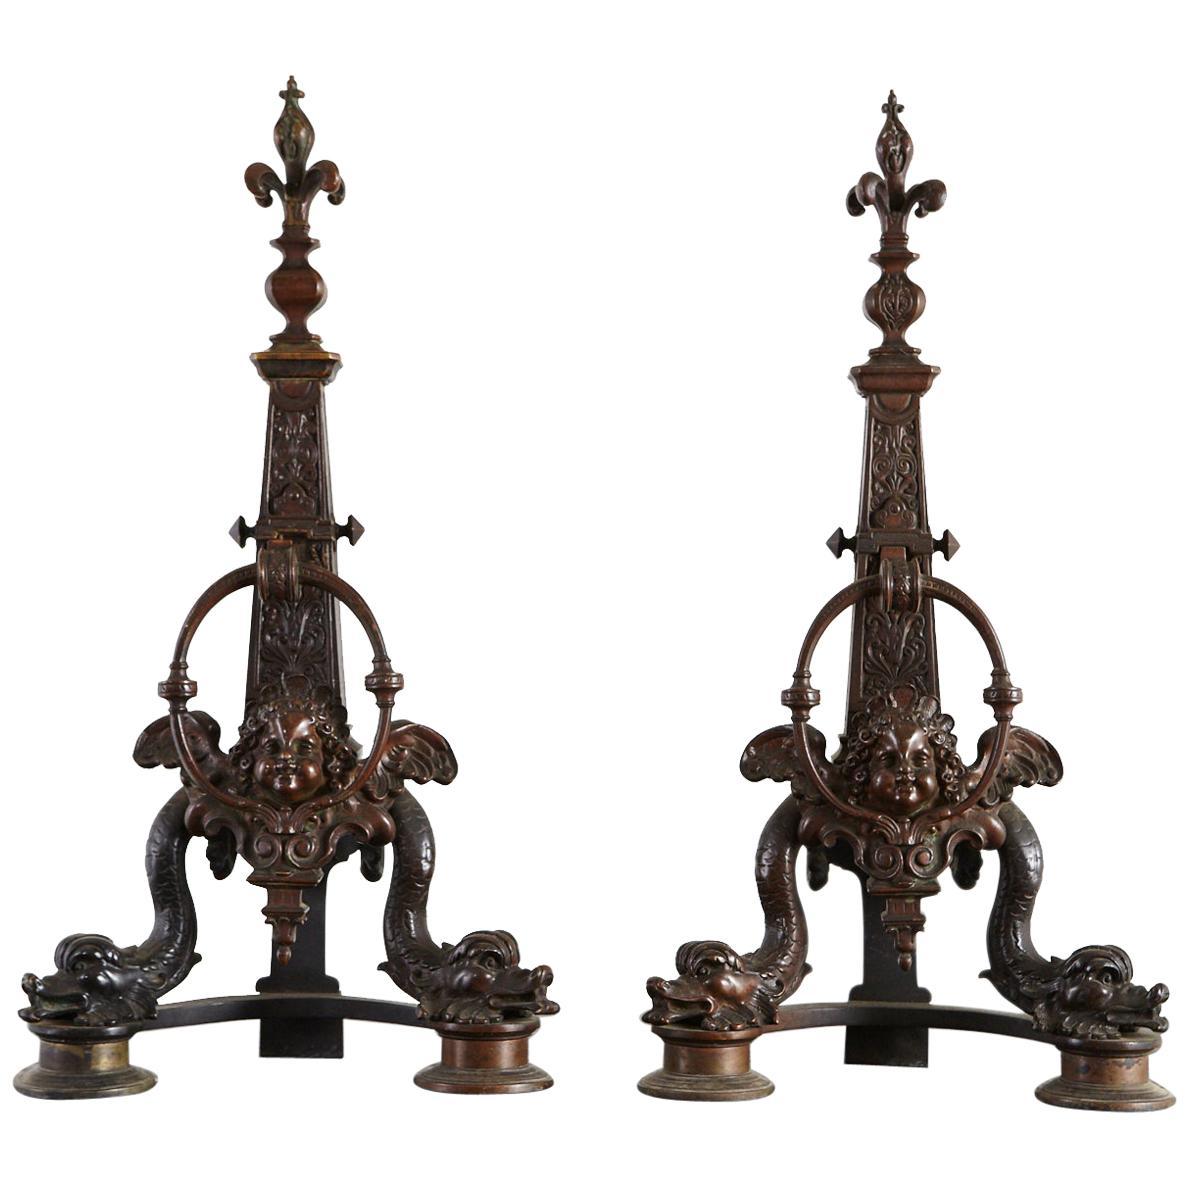 Pair of Late 19th Century French Baroque Bronze Andirons with Dolphin and Putti